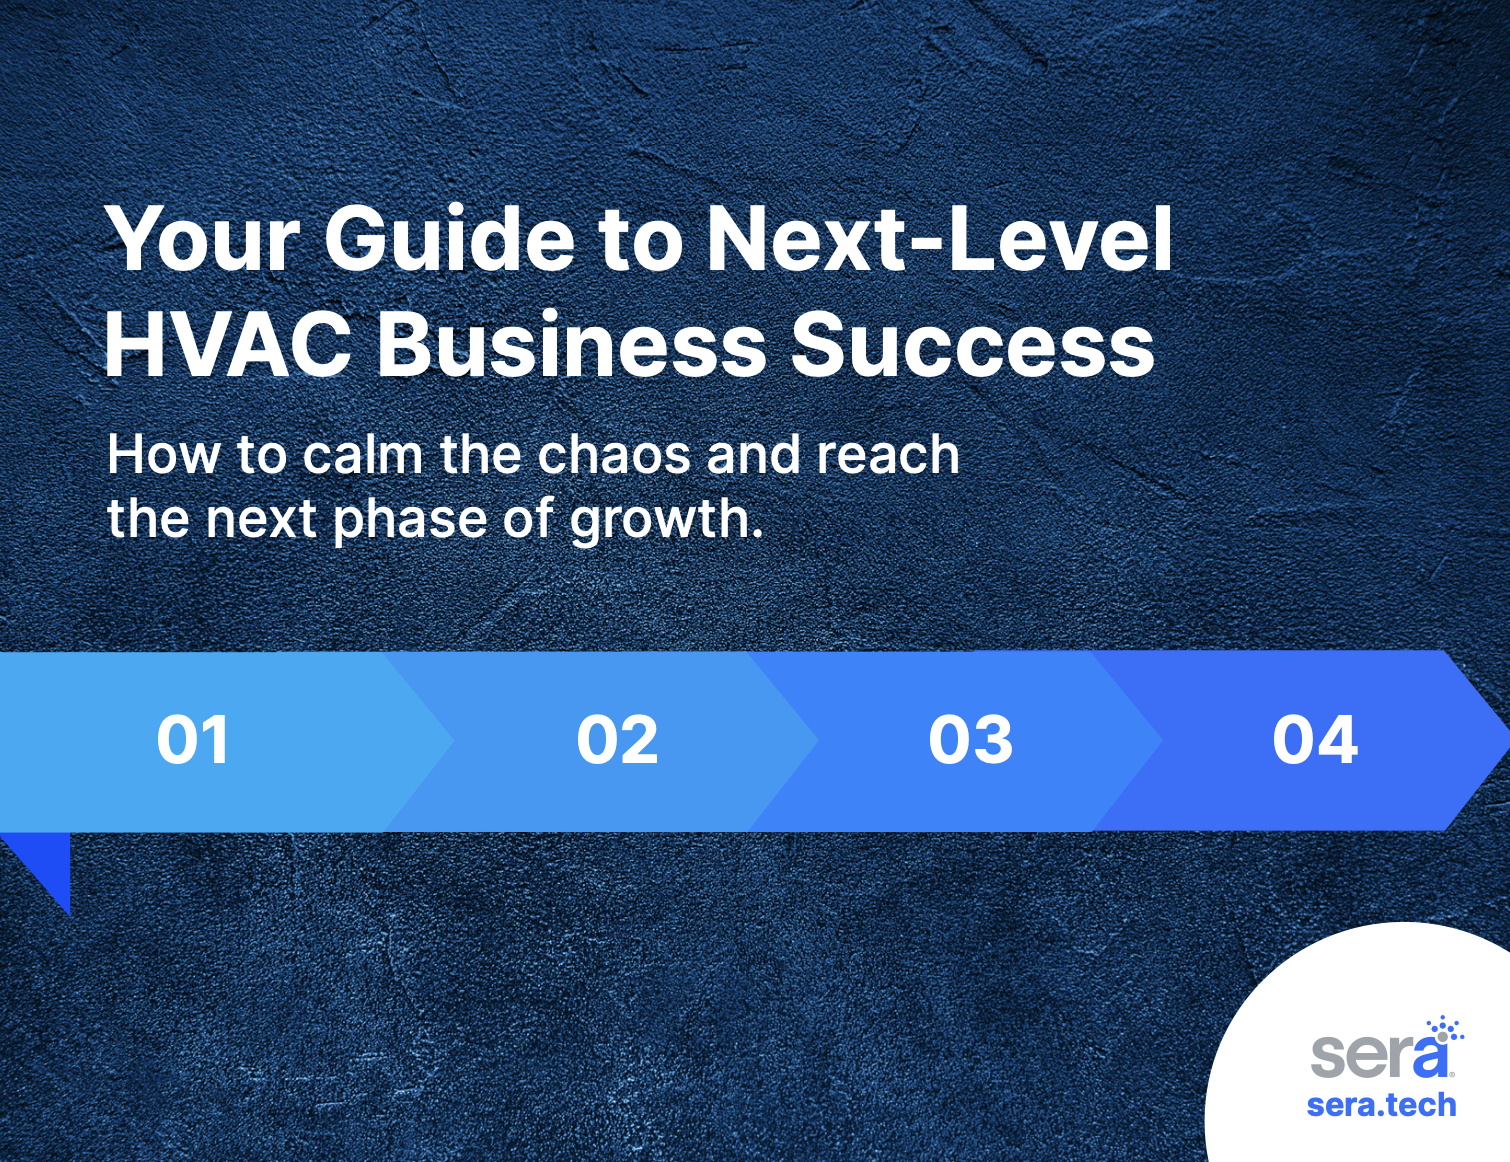 Your Guide to Next-Level HVAC Business Success